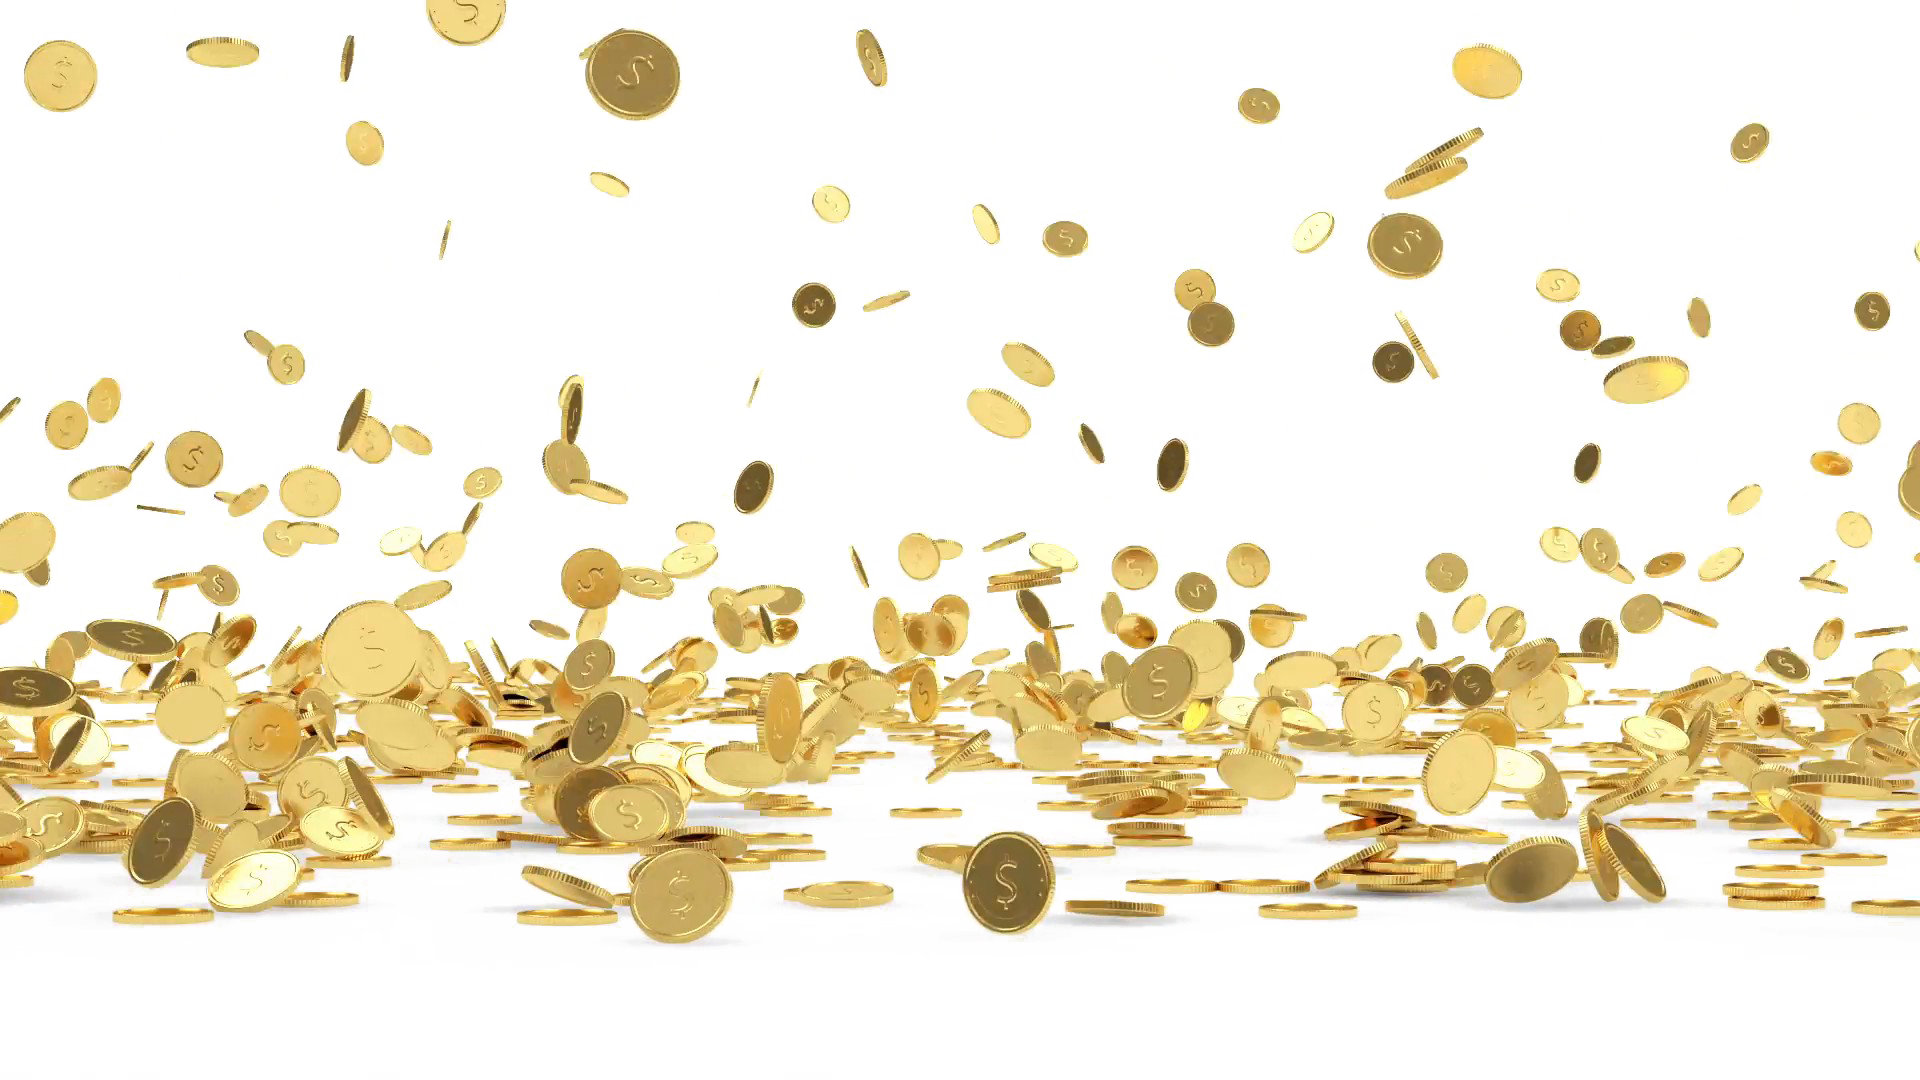 Coins Png Transparent Images - Gold Coins Falling Png - HD Wallpaper 